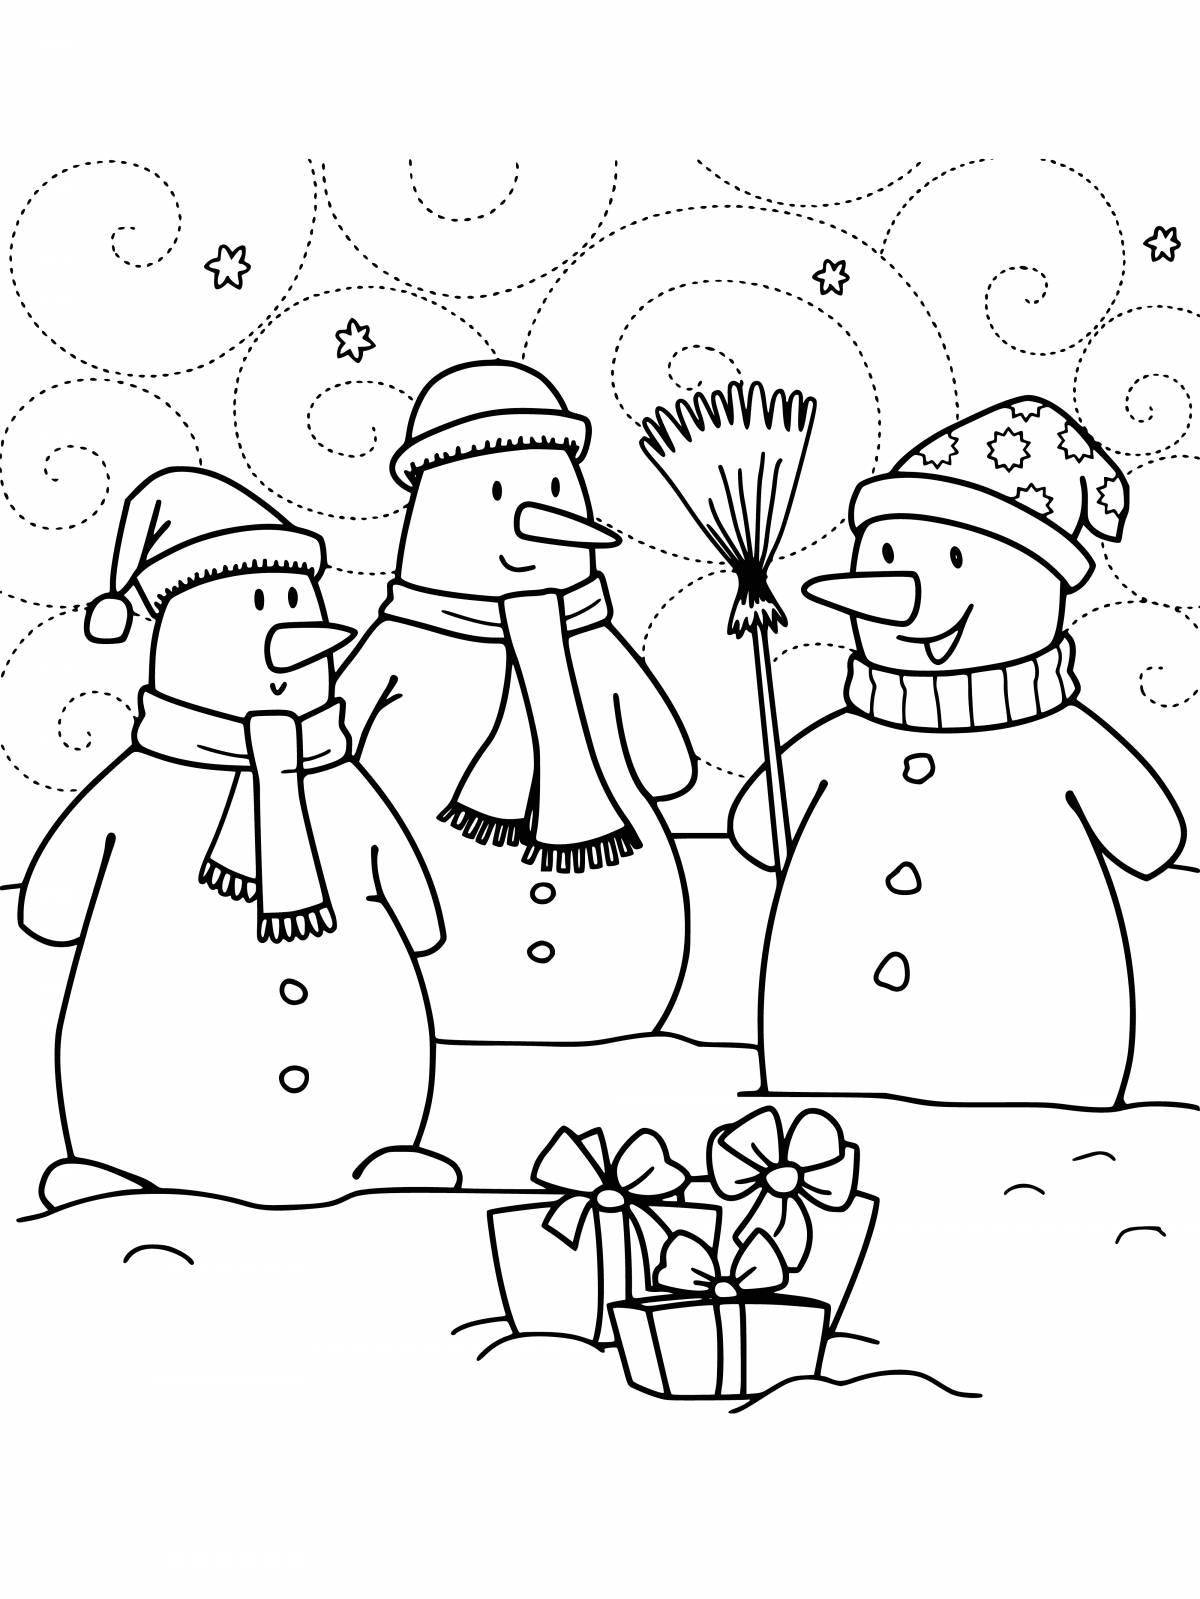 Great snowman coloring pages